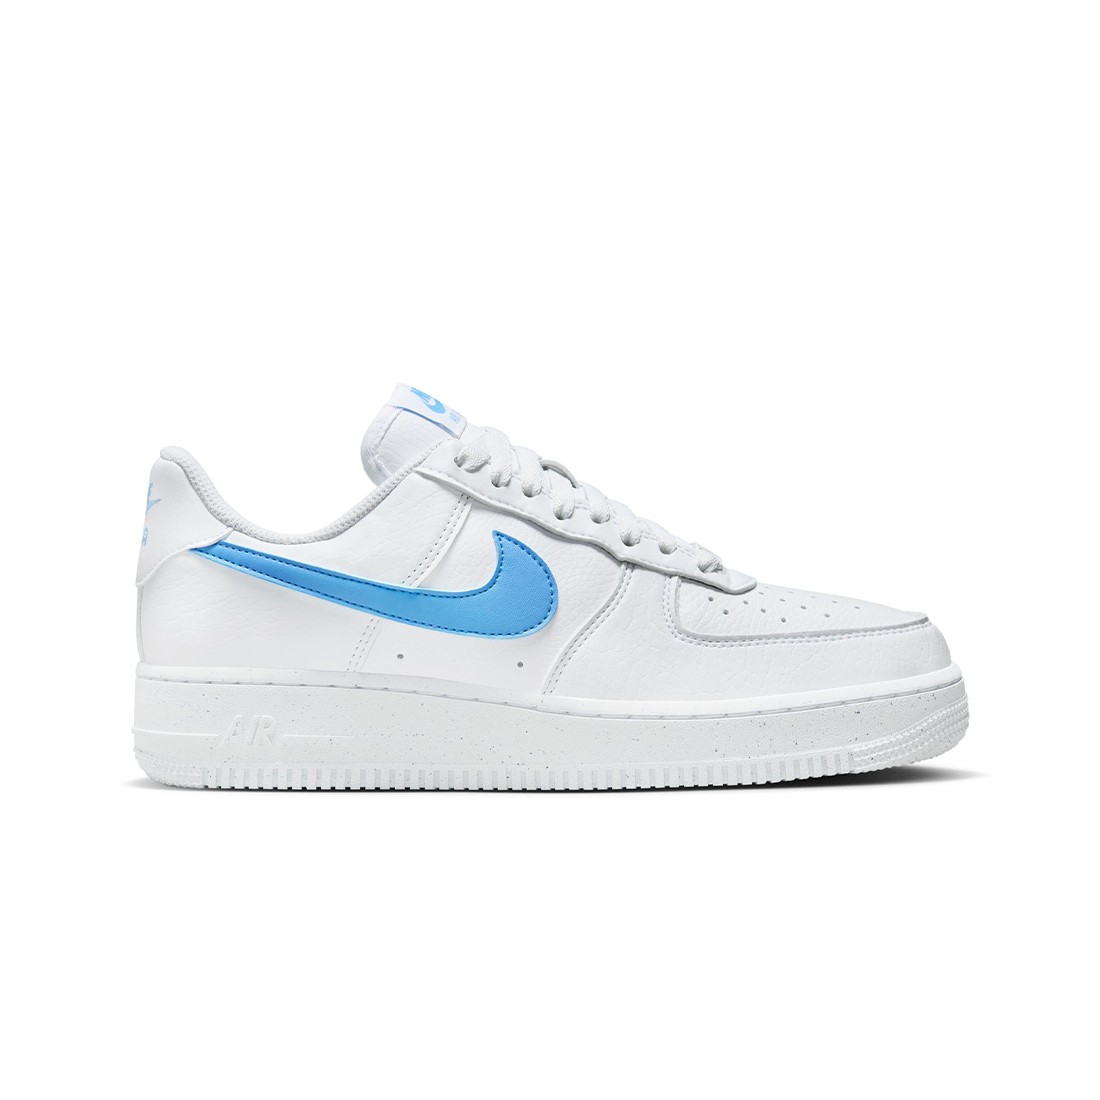 Air Force 1 'Chi Town' 306353 162